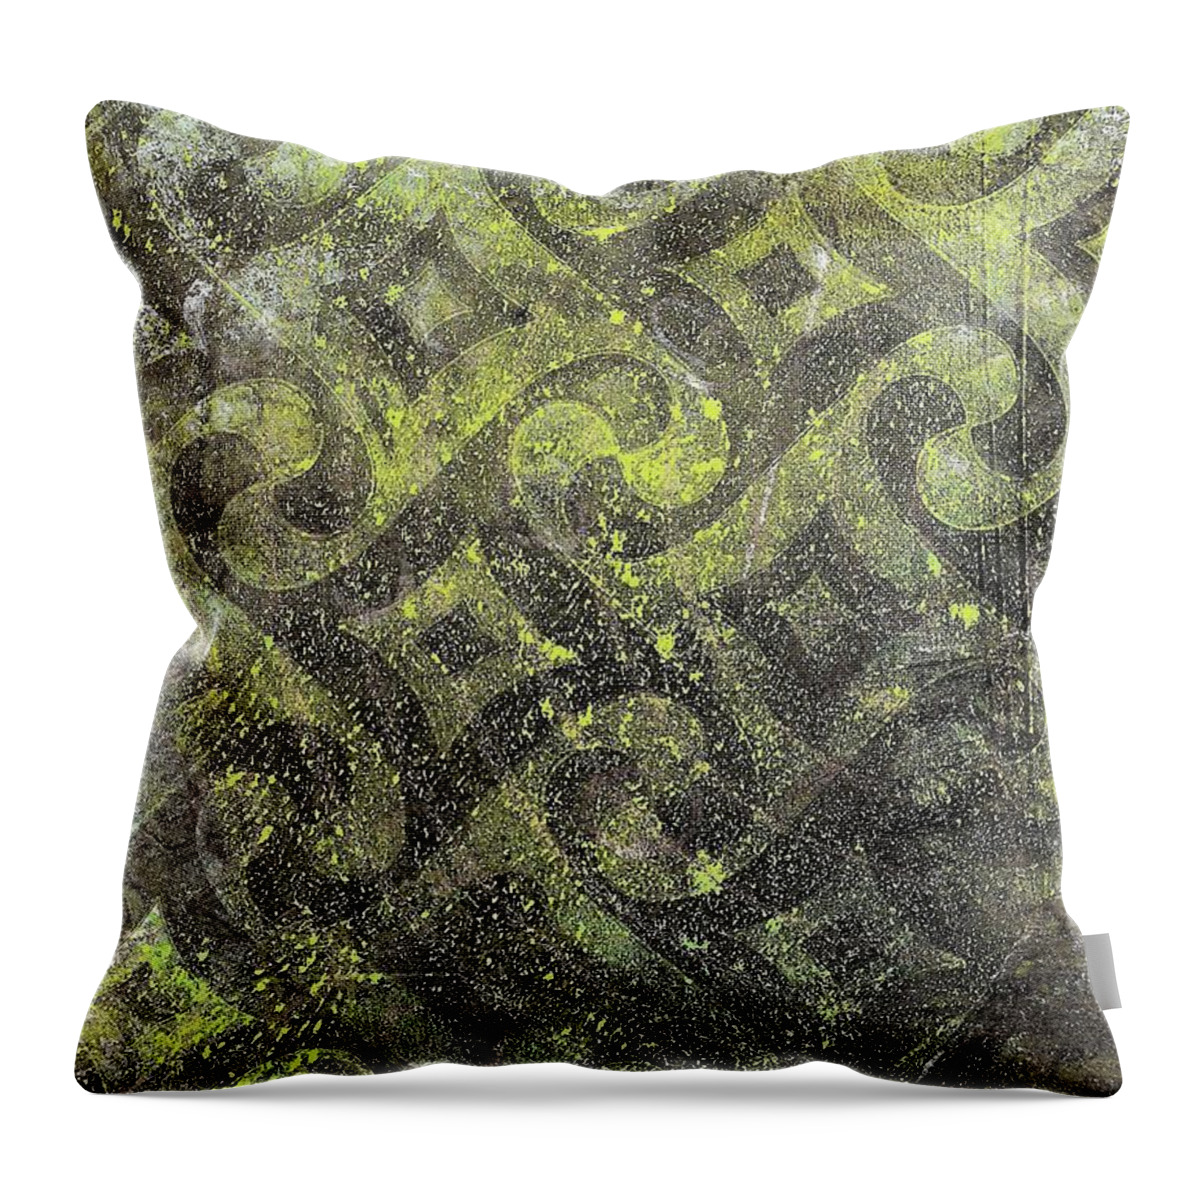 Green Throw Pillow featuring the painting Green Monoprint 2 by Cynthia Westbrook